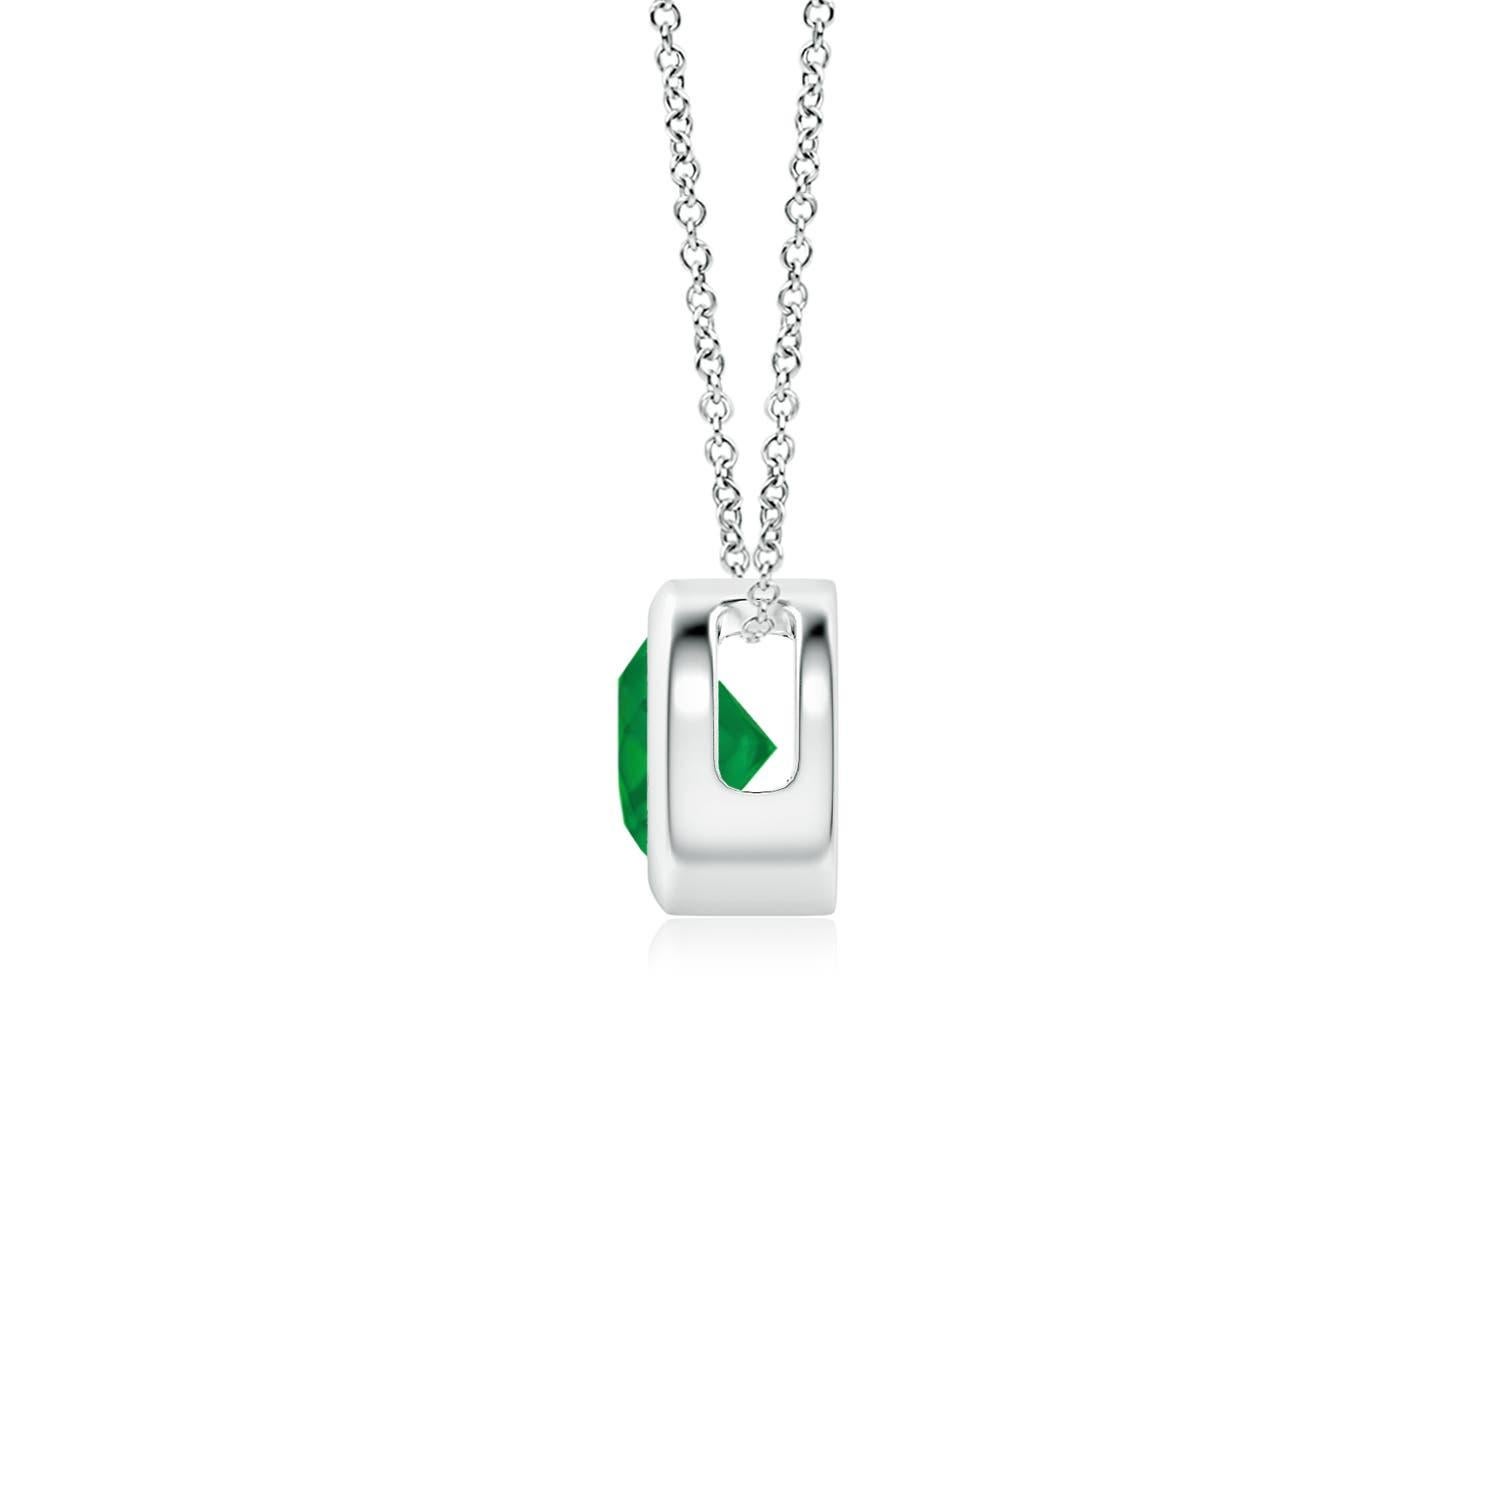 This classic solitaire emerald pendant's beautiful design makes the center stone appear like it's floating on the chain. The lush green emerald is secured in a bezel setting. Crafted in 14k white gold, this round emerald pendant is simple yet